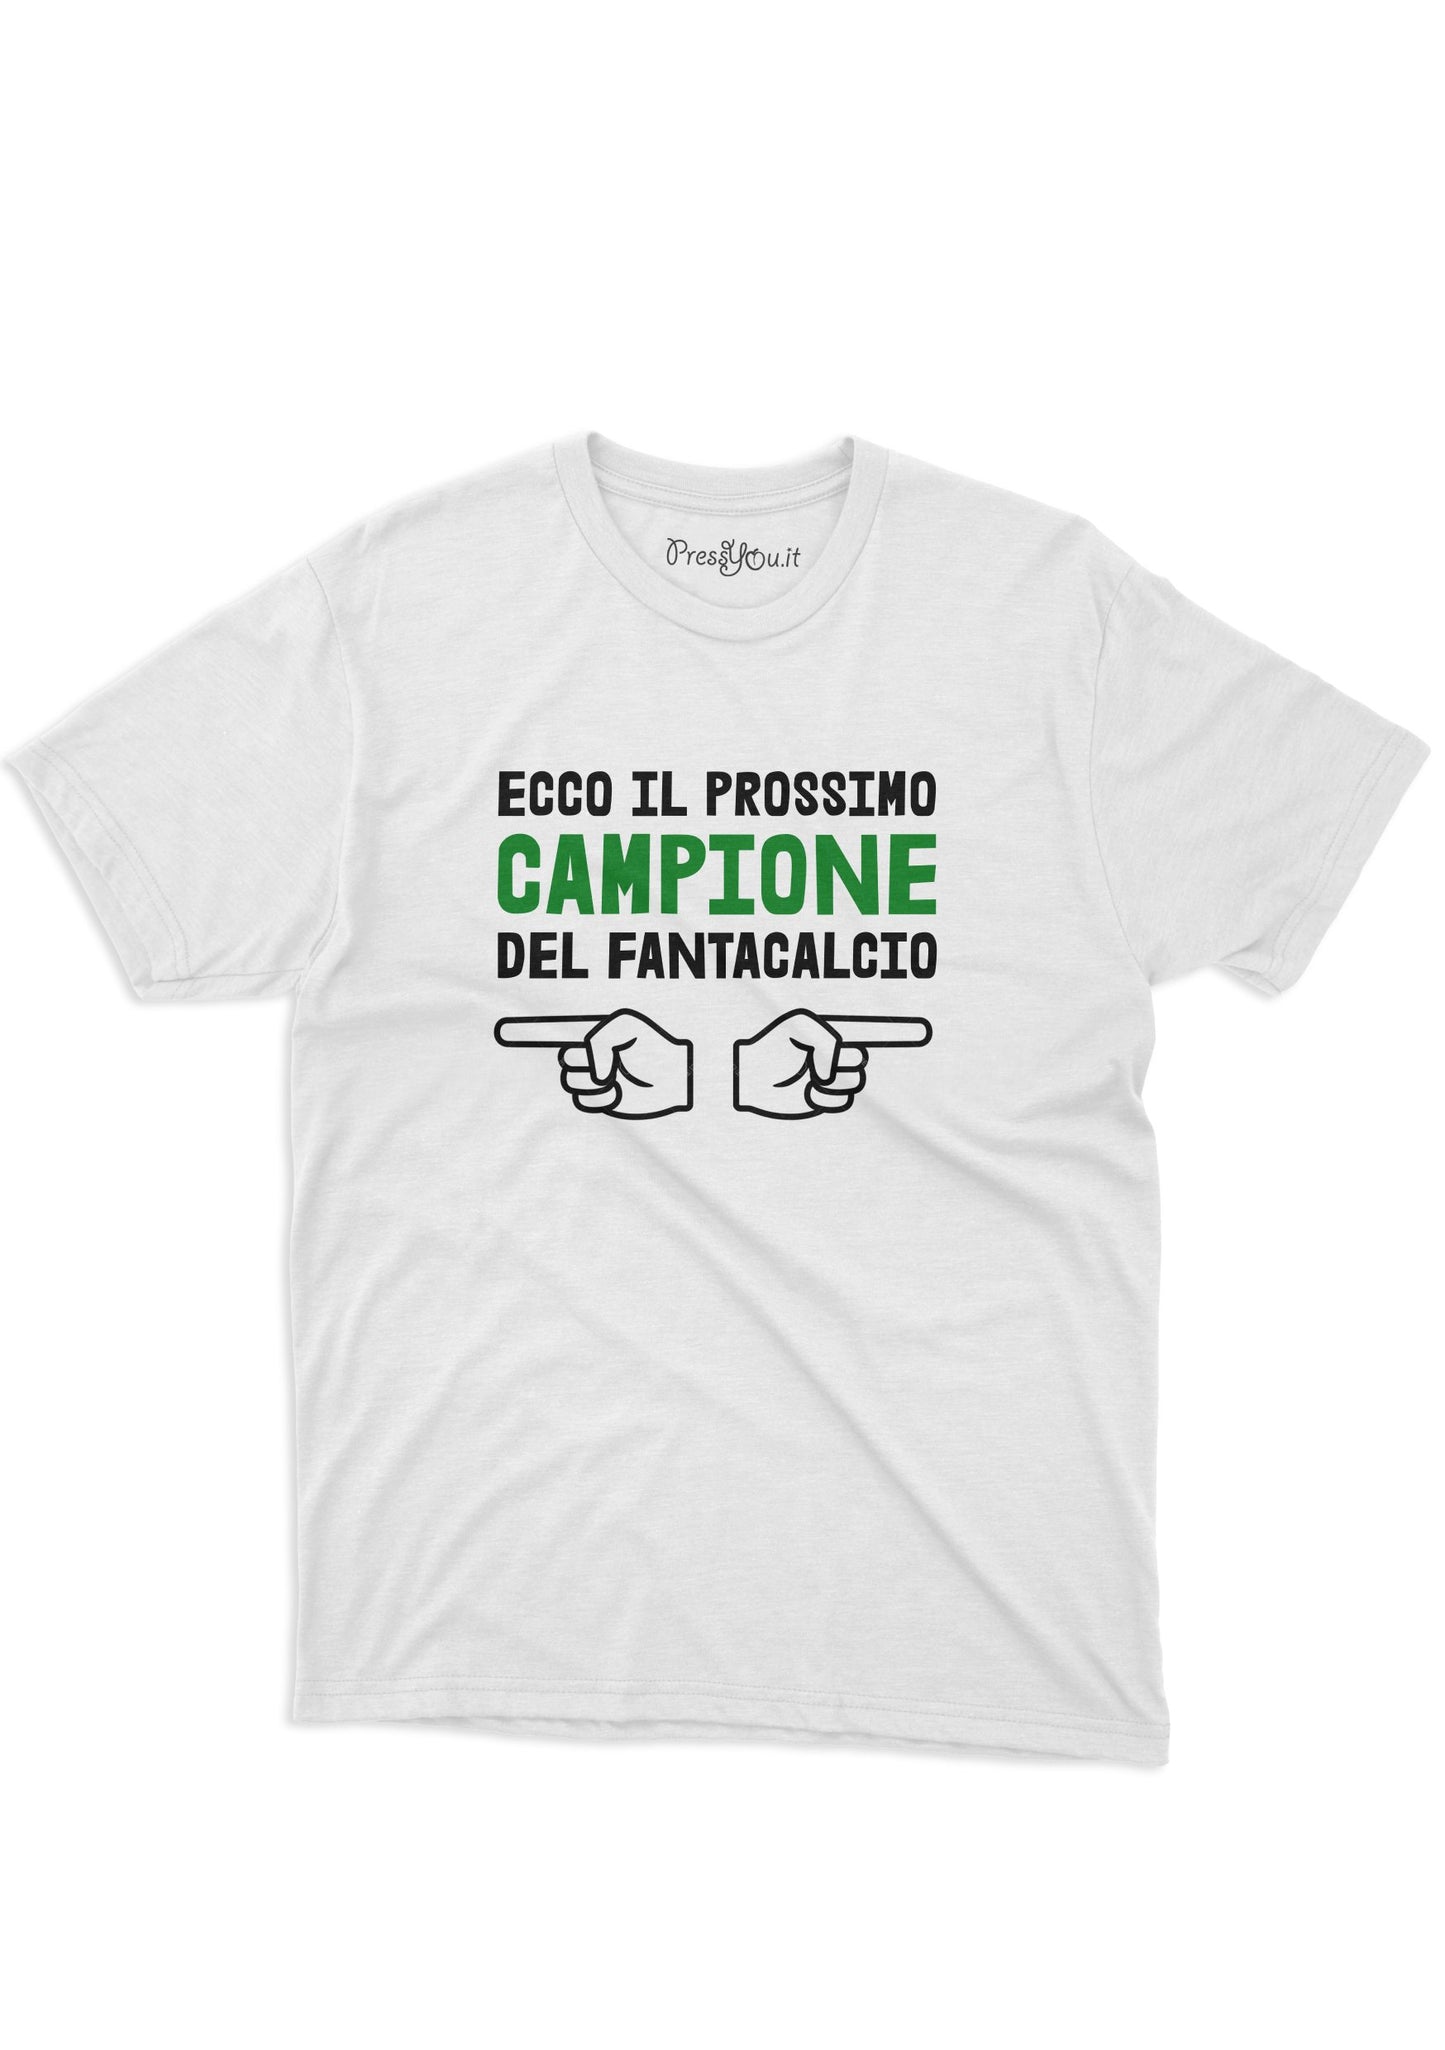 fantasy football t-shirt here is the next winner of fantasy football owl superstition fun gift idea